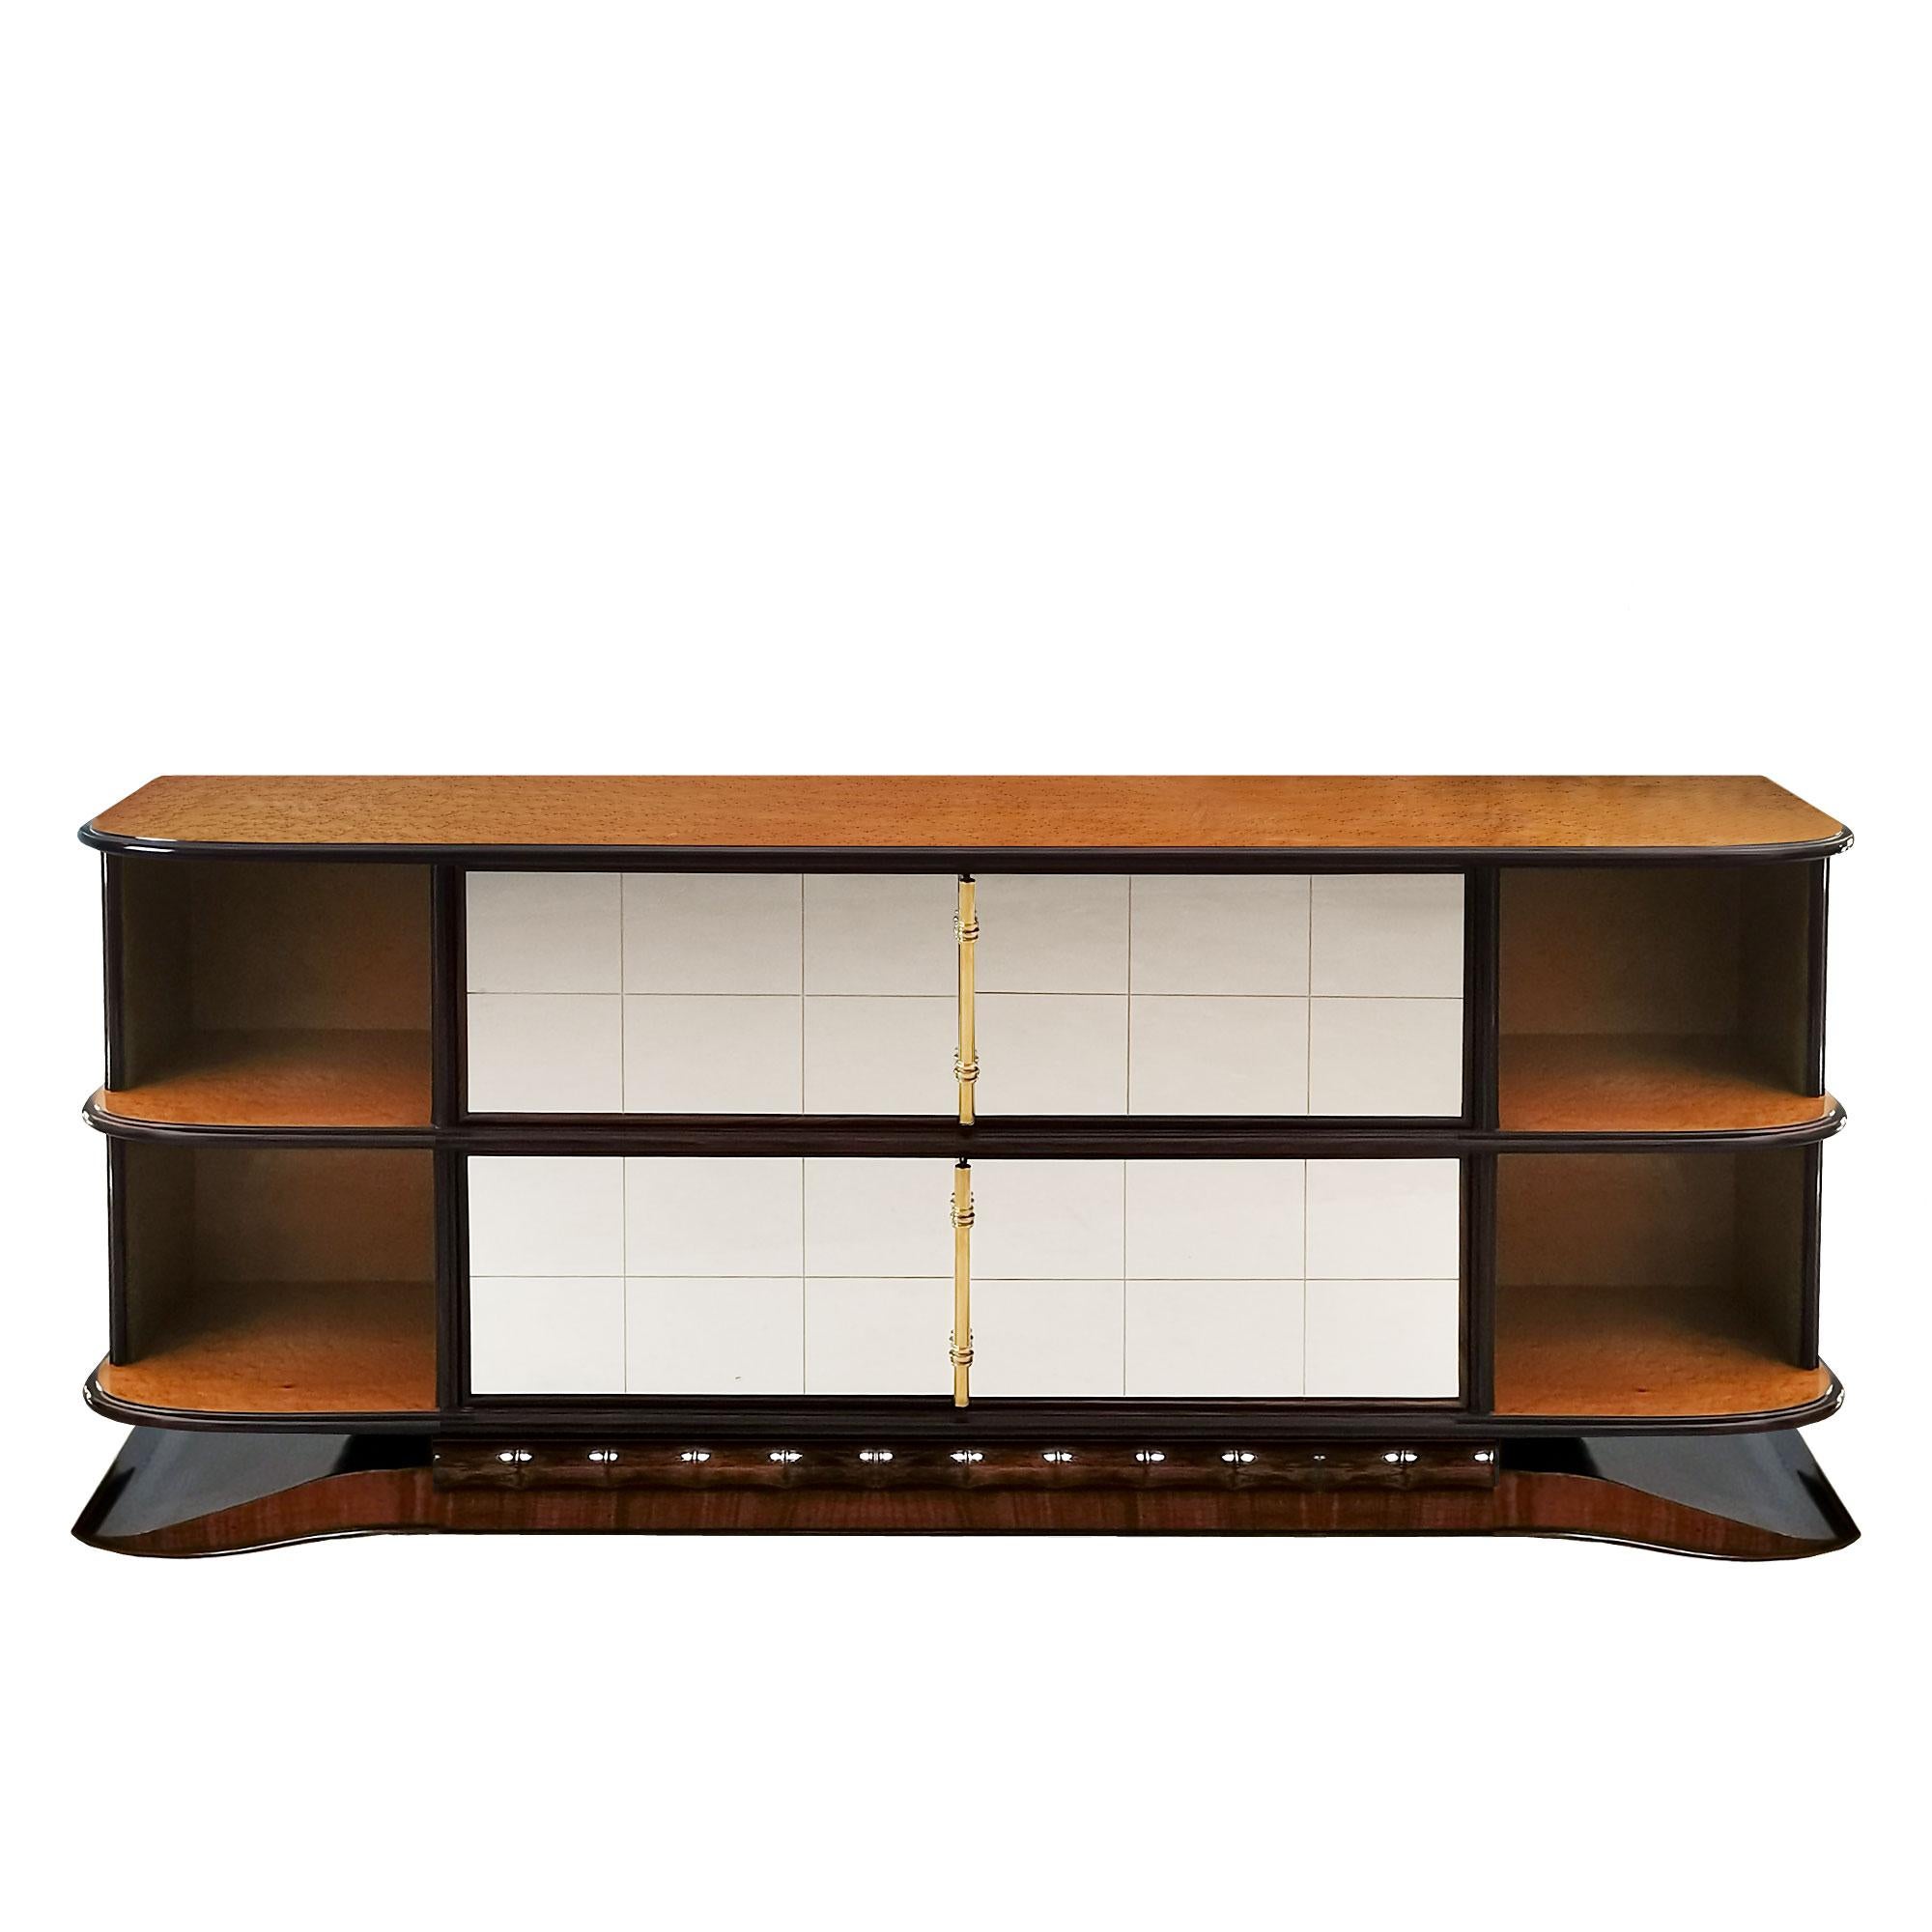 1930's Art Deco Sideboard, Birdseye Maple, Mahogany, Mirrors and Brass - Italy In Good Condition For Sale In Girona, ES